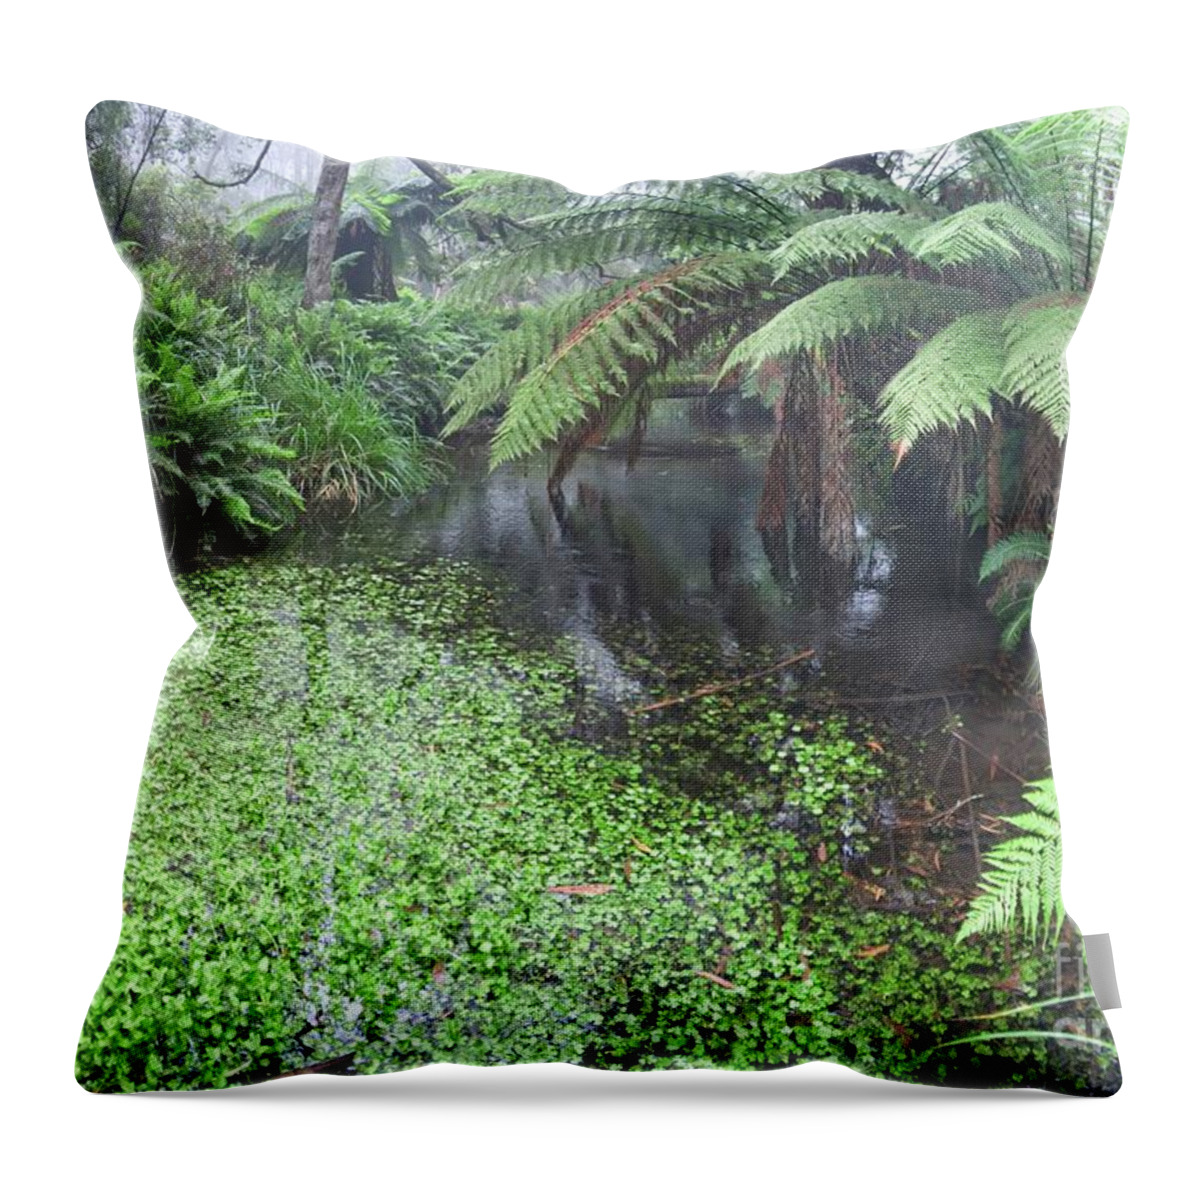 Rain Forest Throw Pillow featuring the photograph Rain Forests A A by Peter Kneen